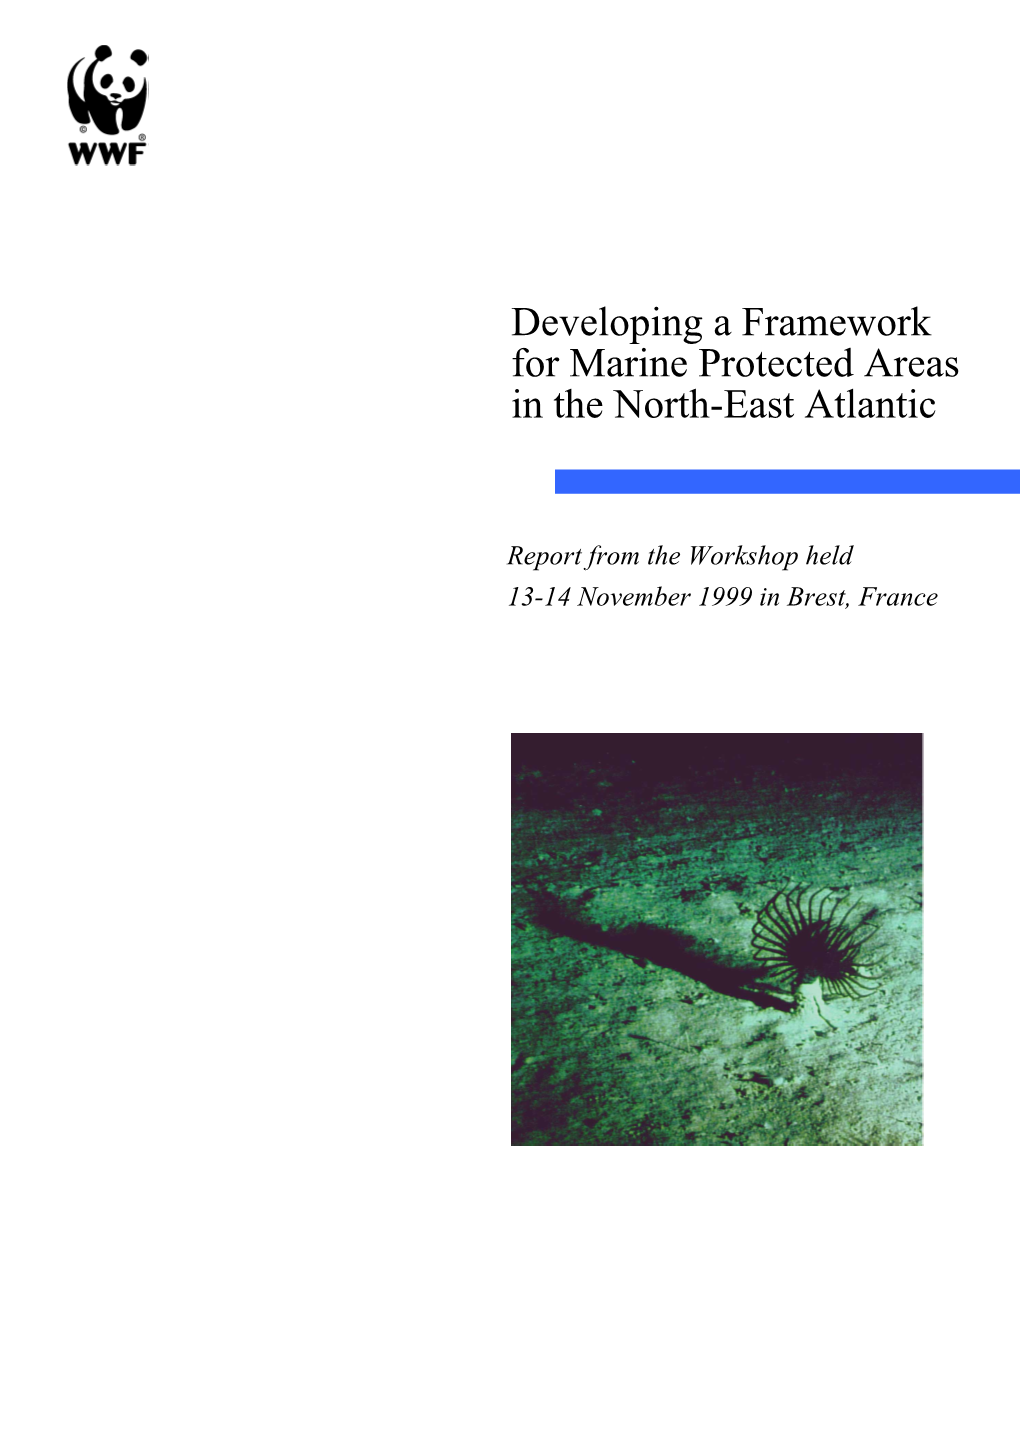 For Marine Protected Areas in the North-East Atlantic